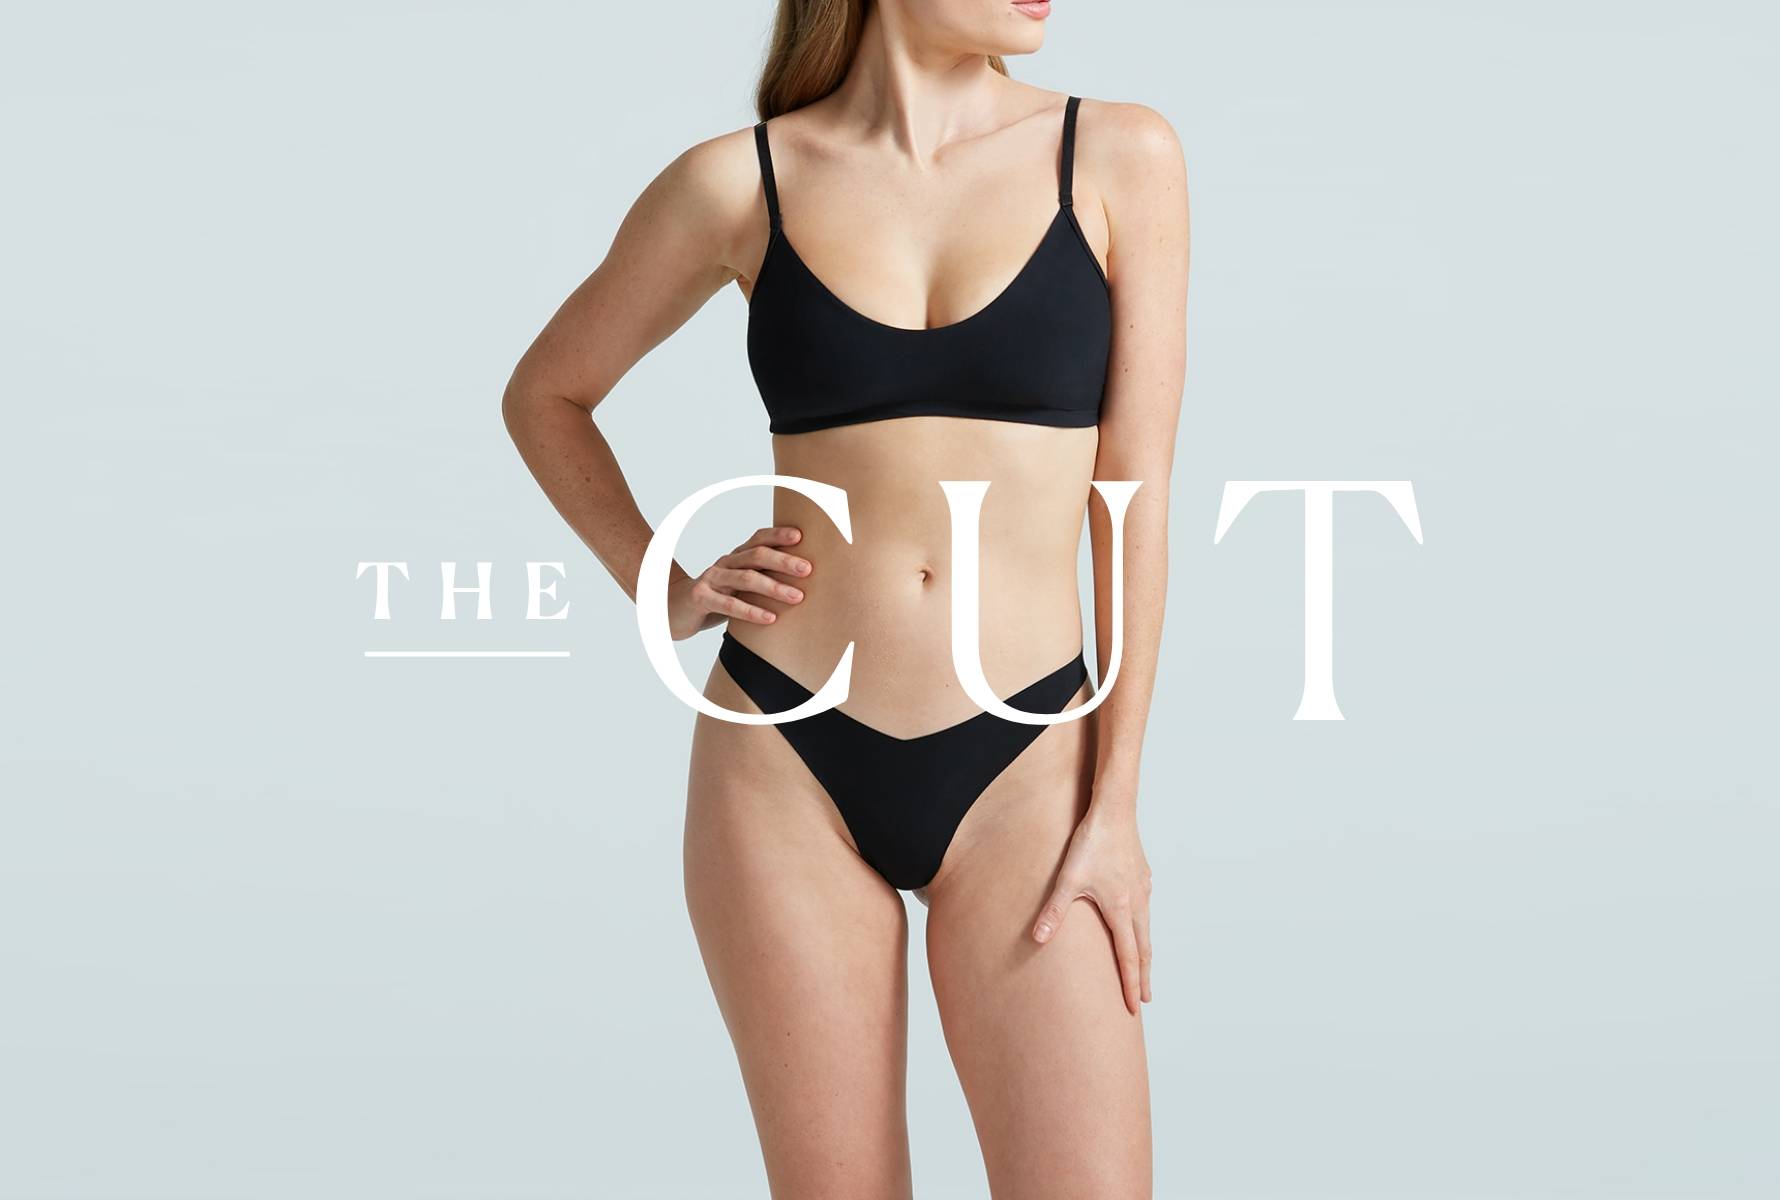 Model wearing the Butter Bralette and Tiny Thong in black with The Cut logo overlayed ontop of the image.